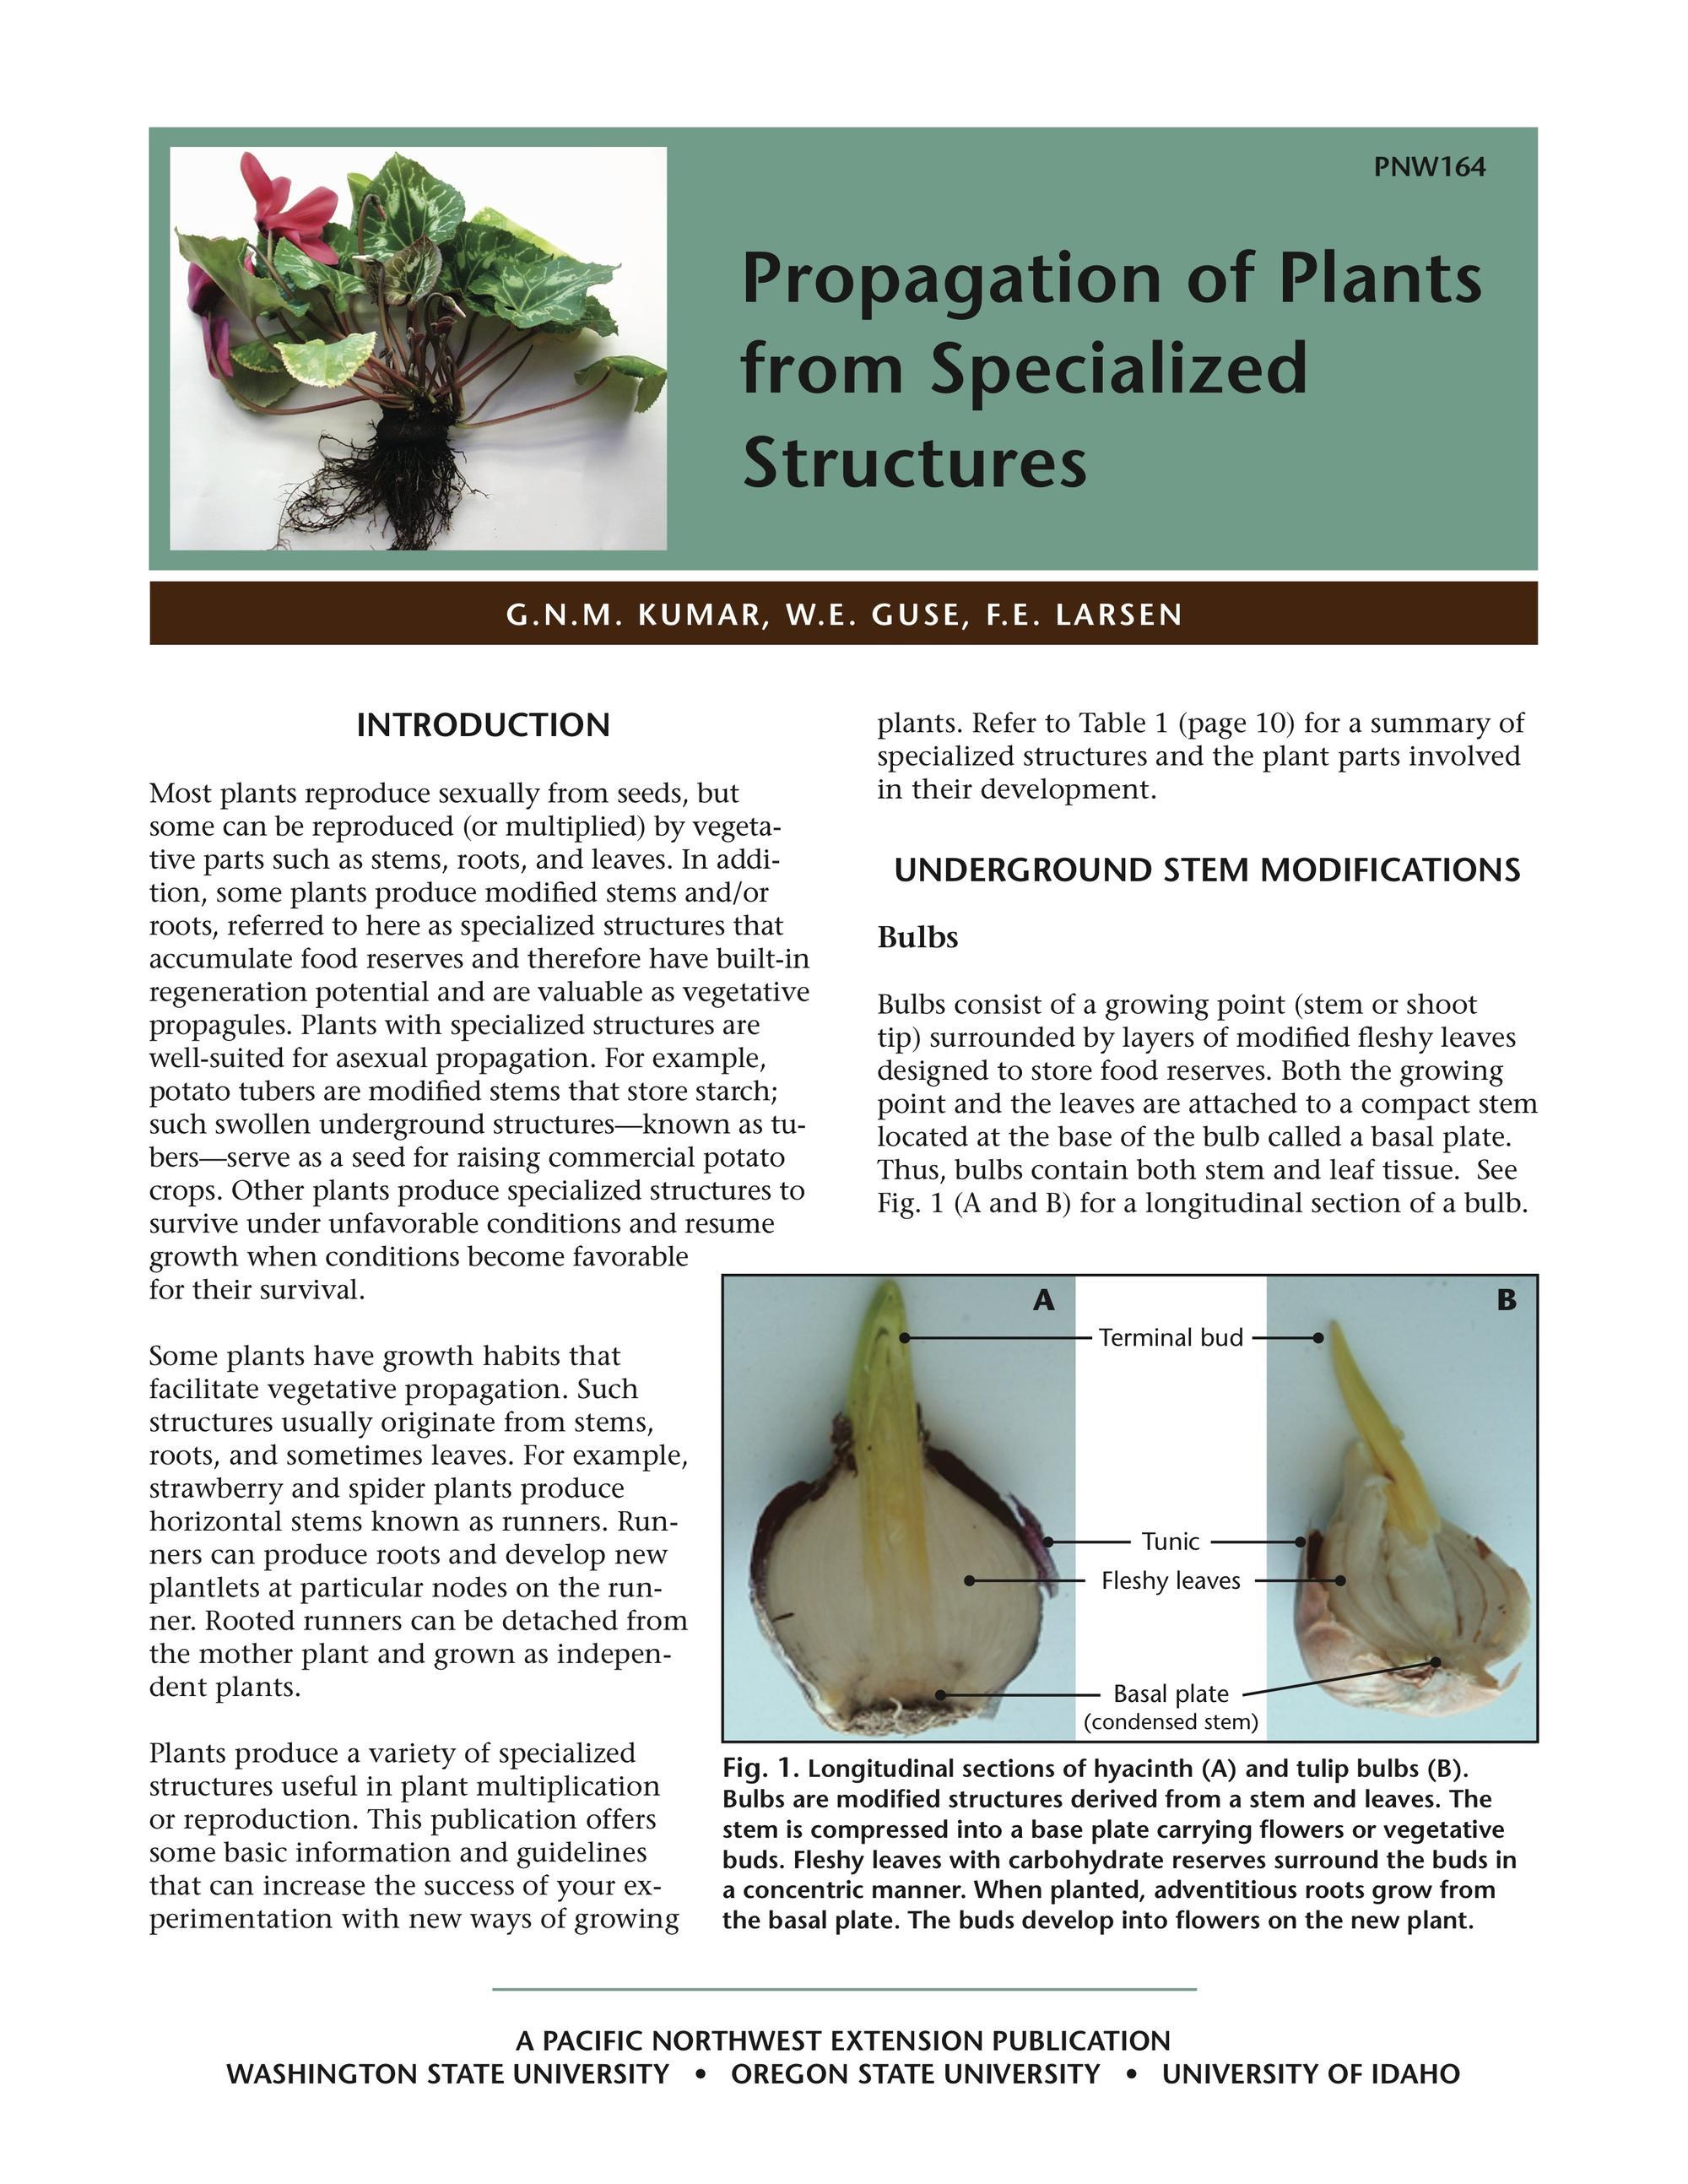 Image of Propagation of Plants from Specialized Structures publication